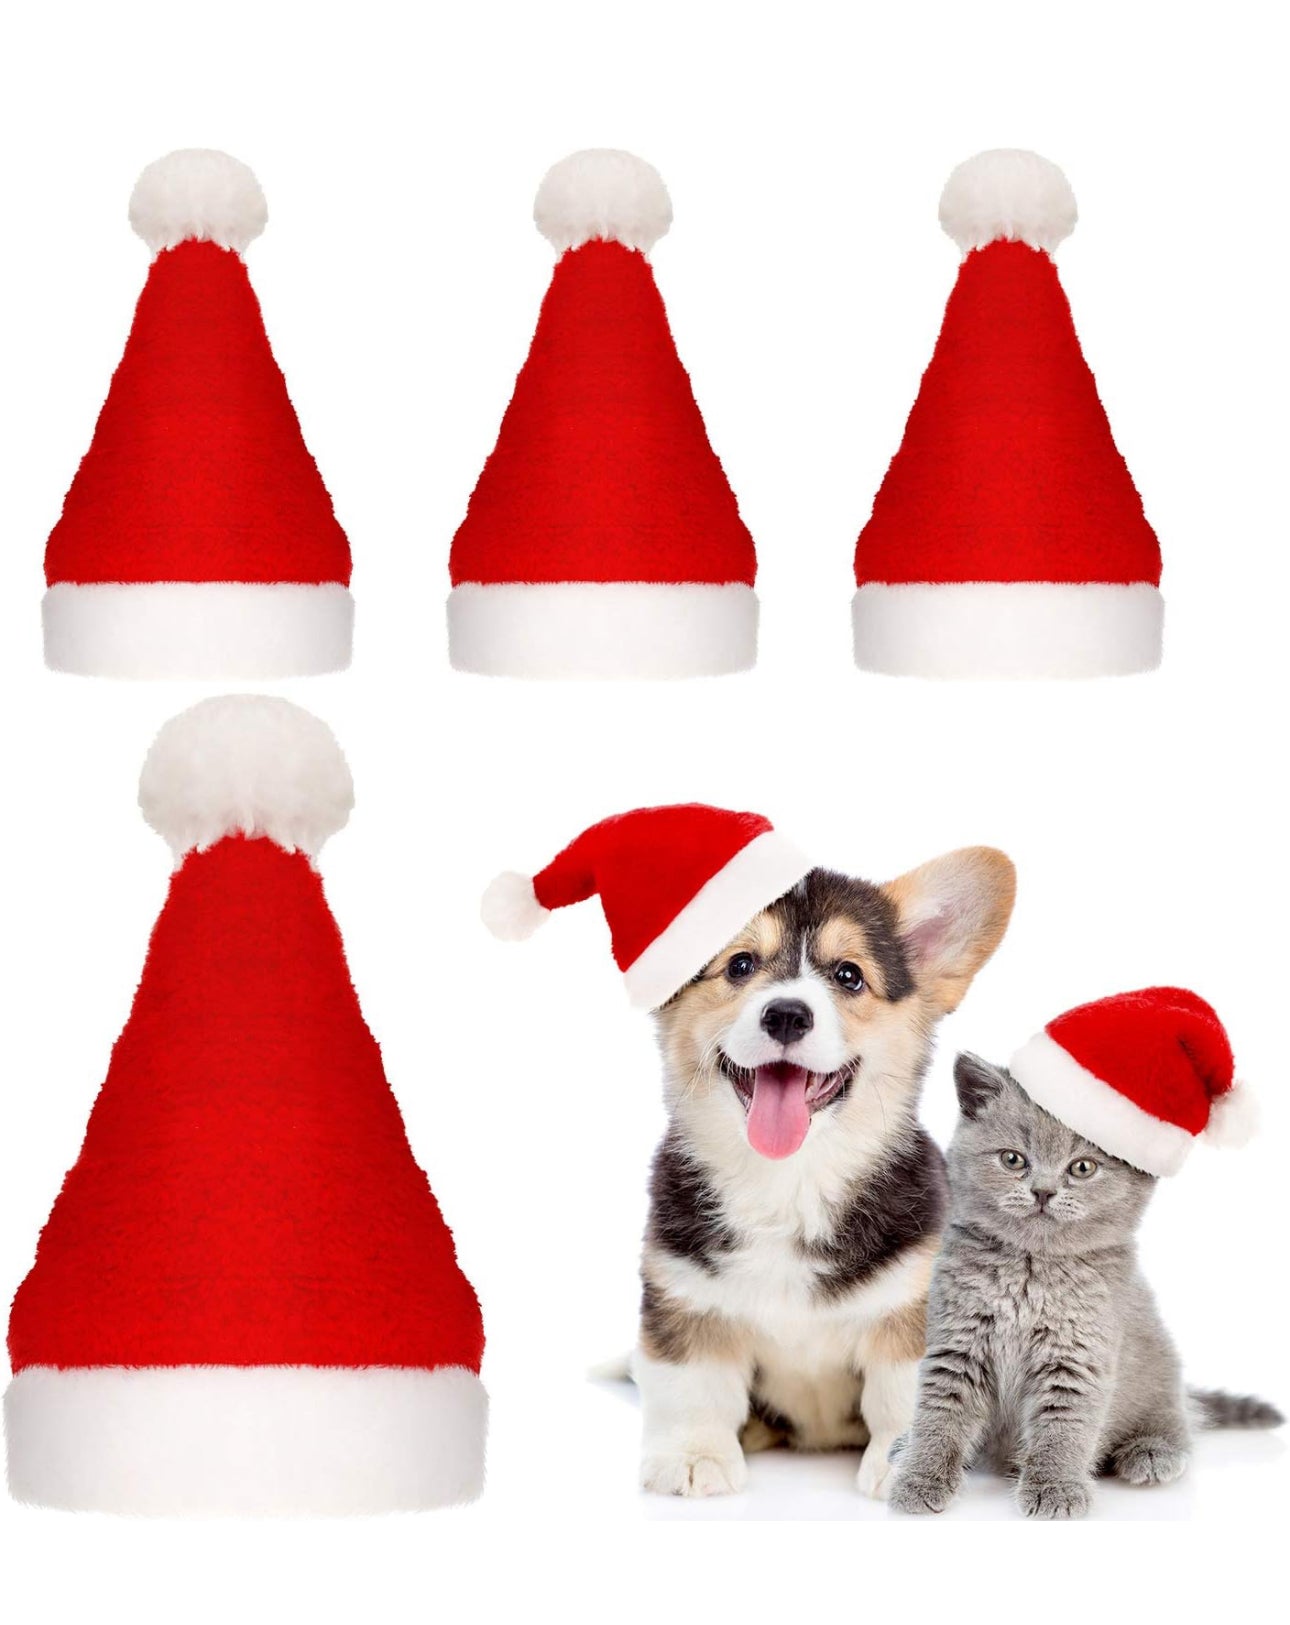 4 Pieces Dog Santa Hat Christmas Pet Hats Pet Costumes for Dogs Cats Christmas Supplies